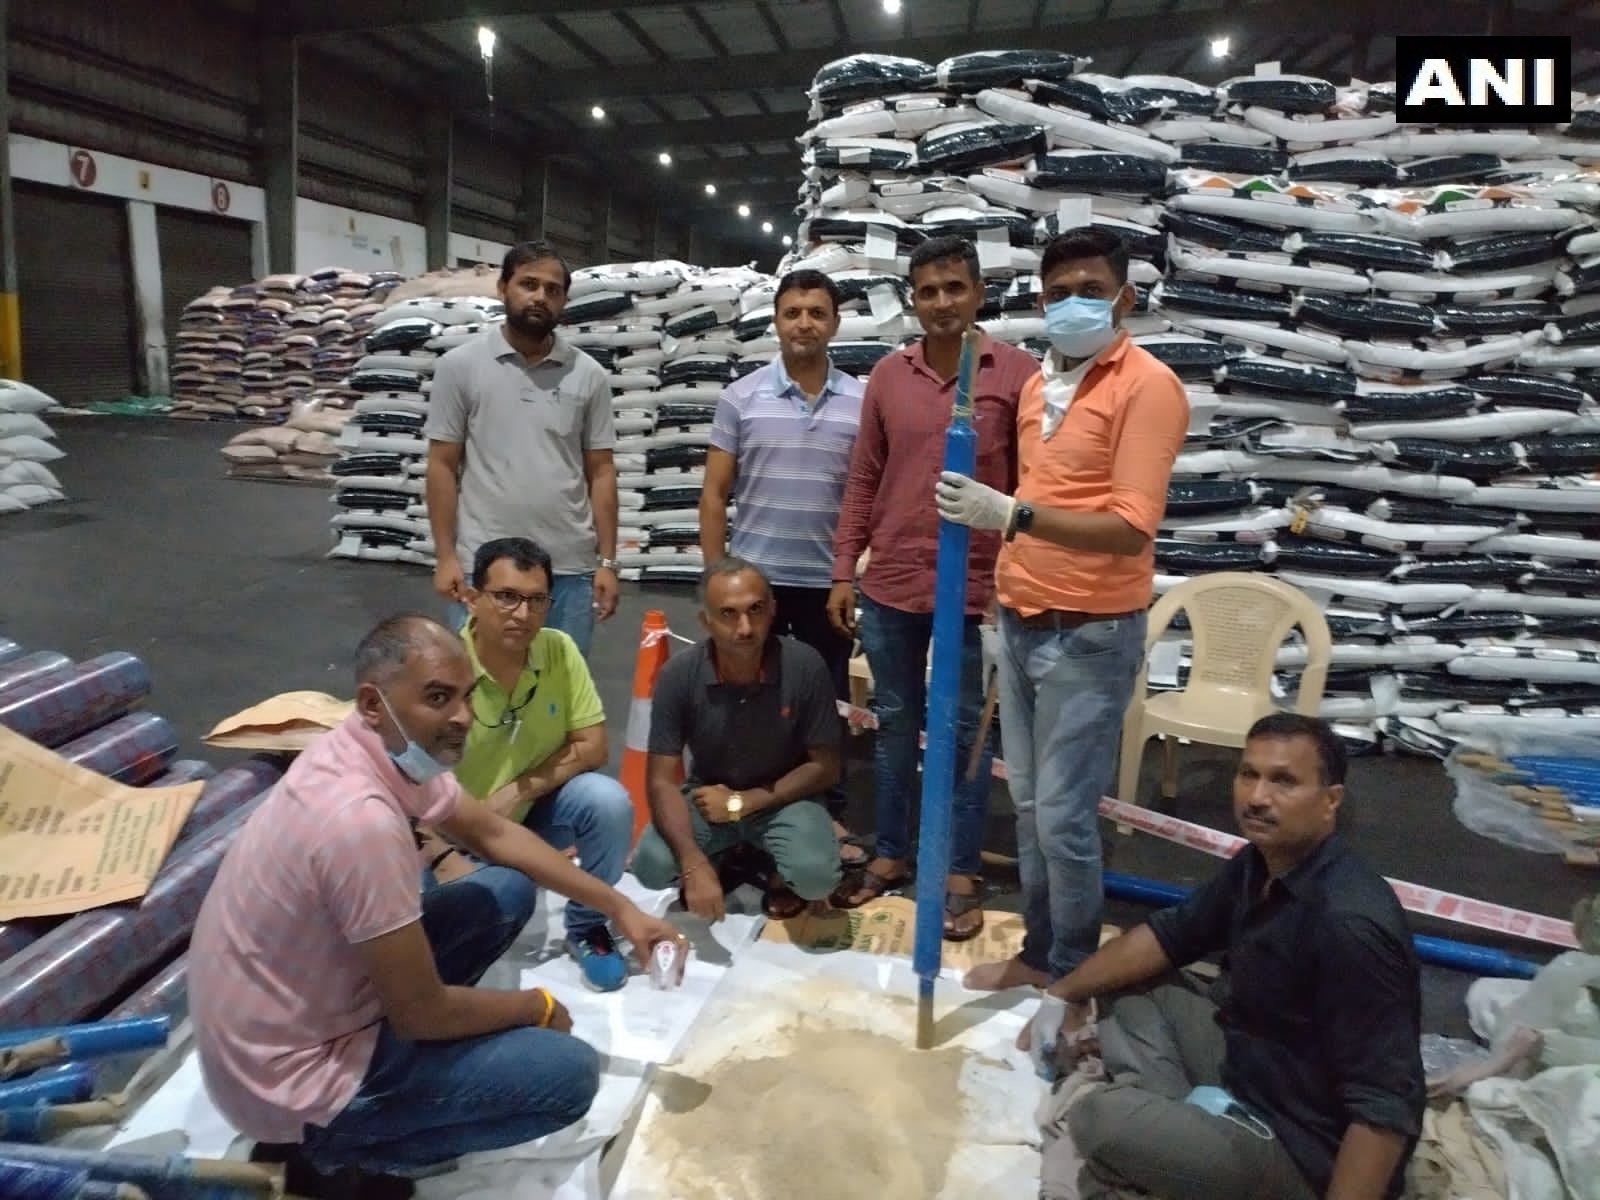 Photos heroin worth Rs 376 crores from Mundra port in Kutch Gujrat